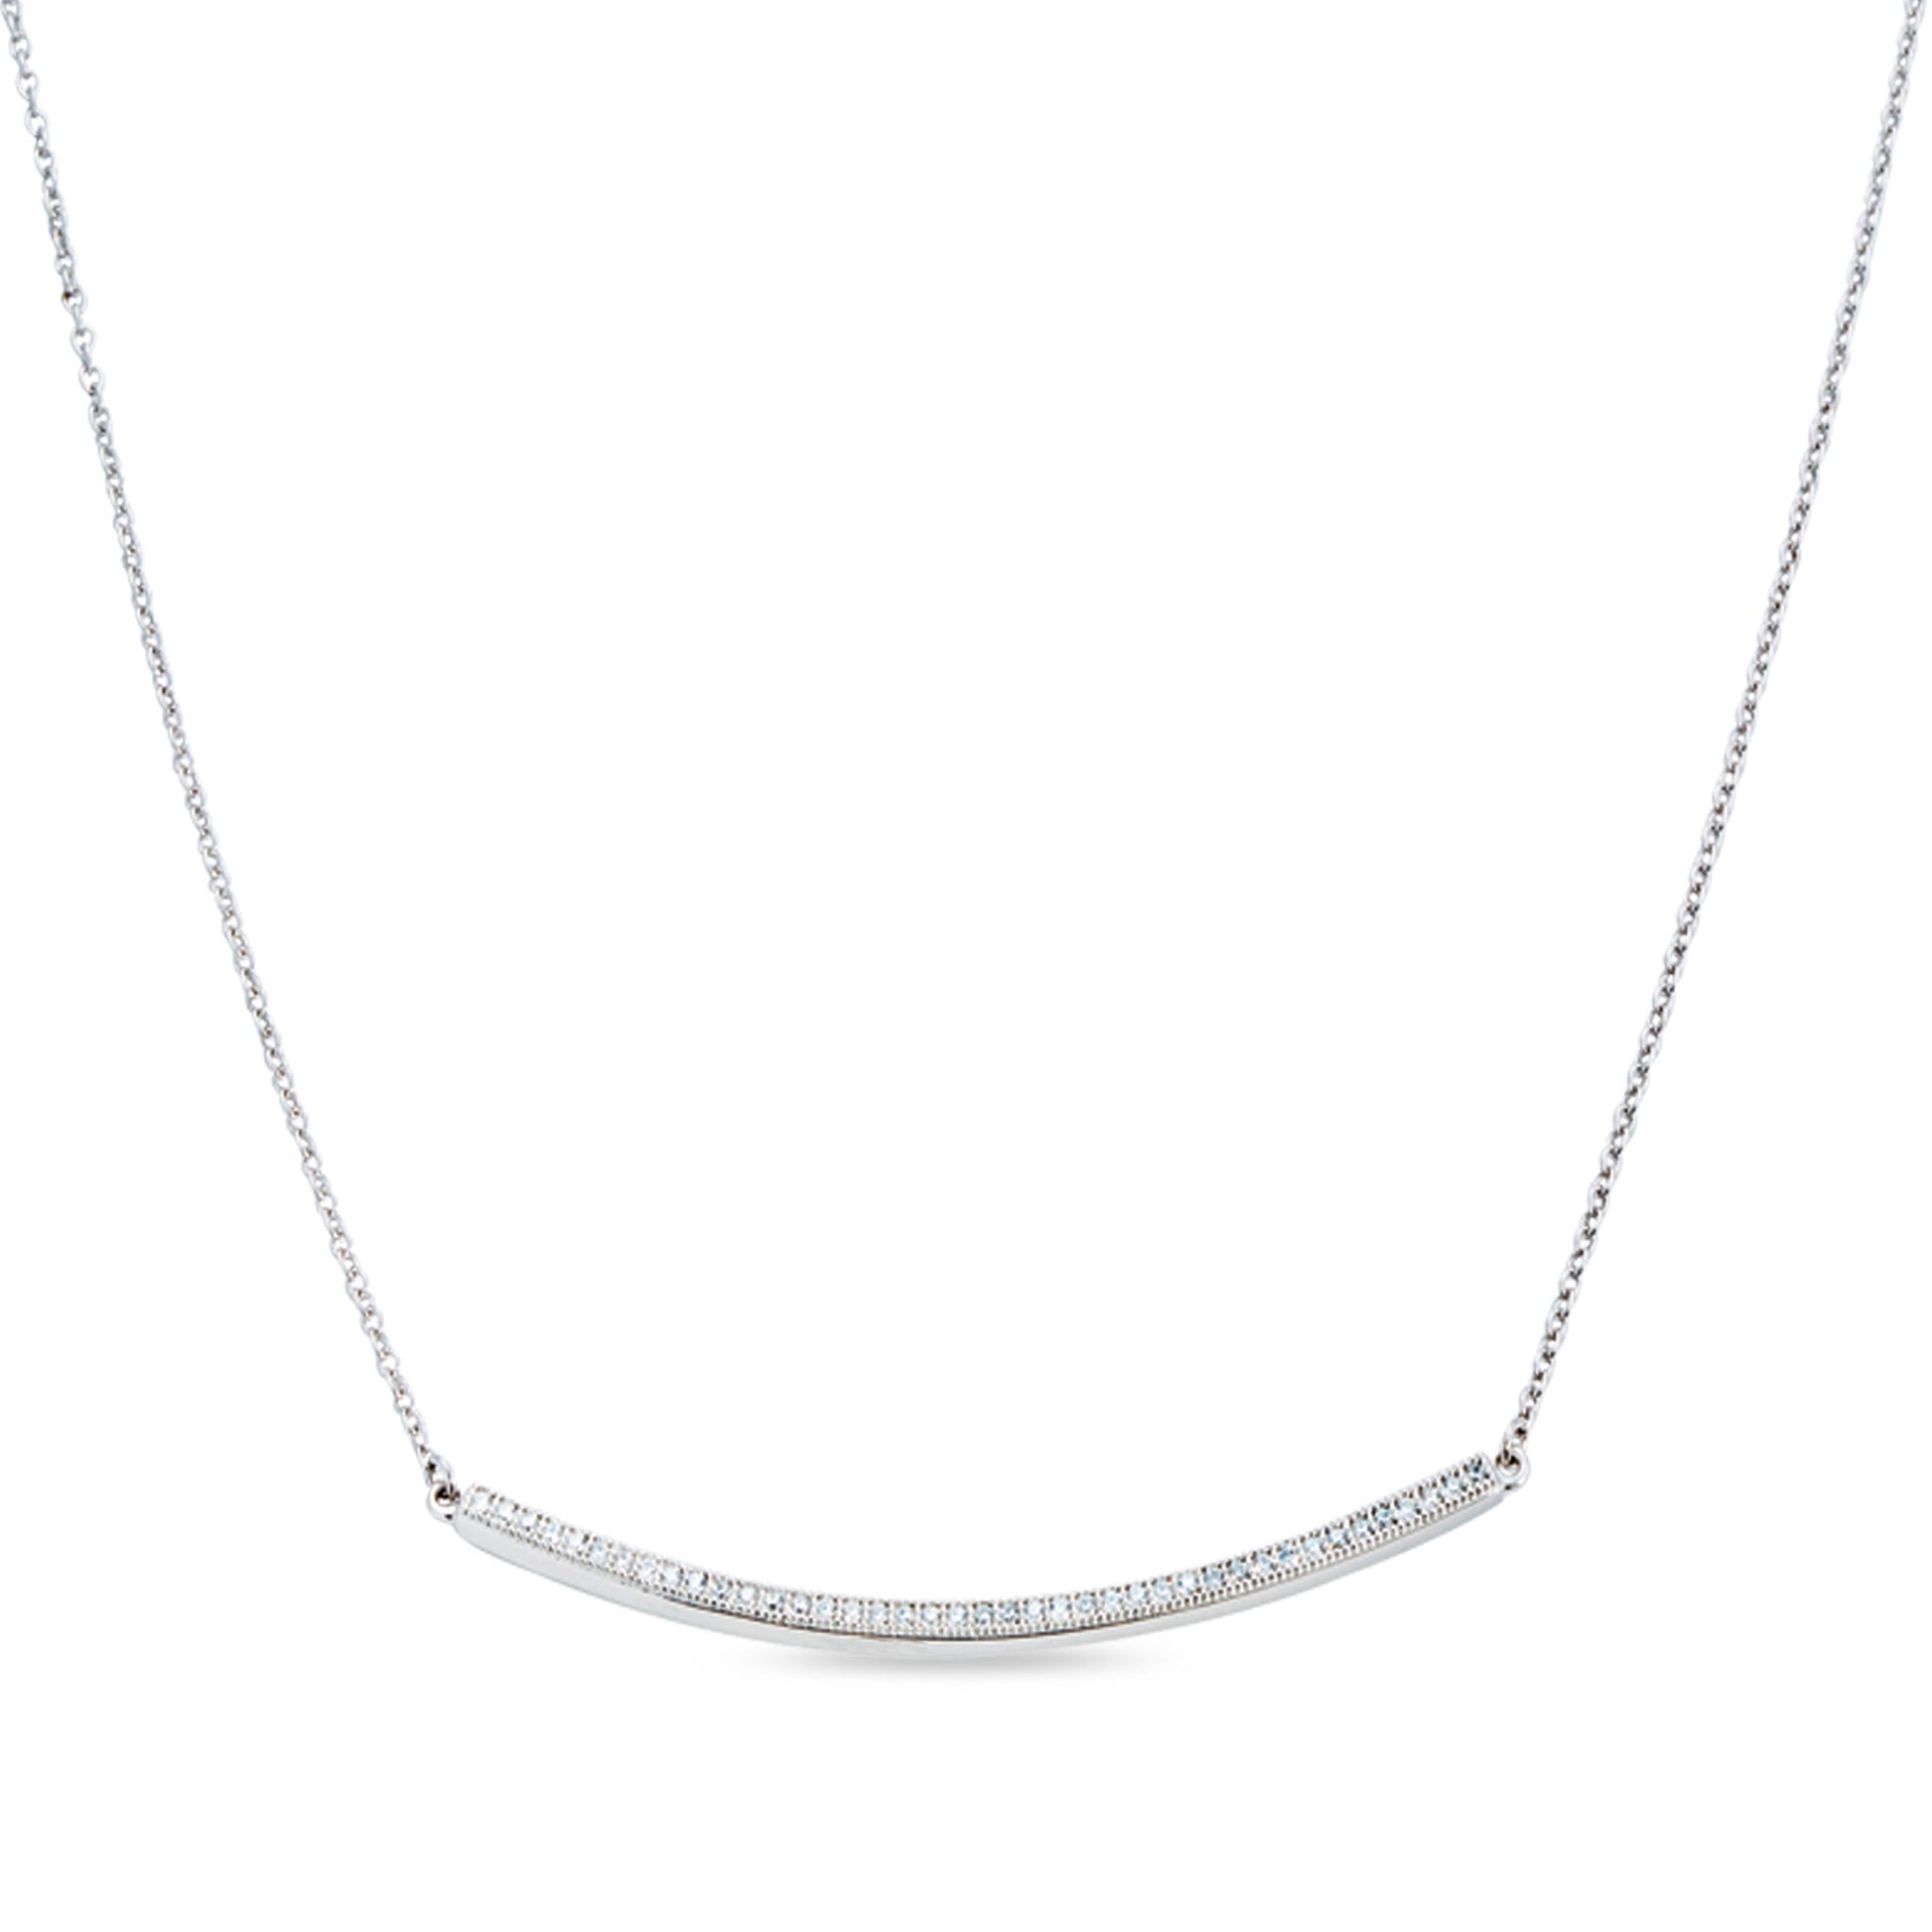 A curved bar necklace with 41 simulated diamonds displayed on a neutral white background.